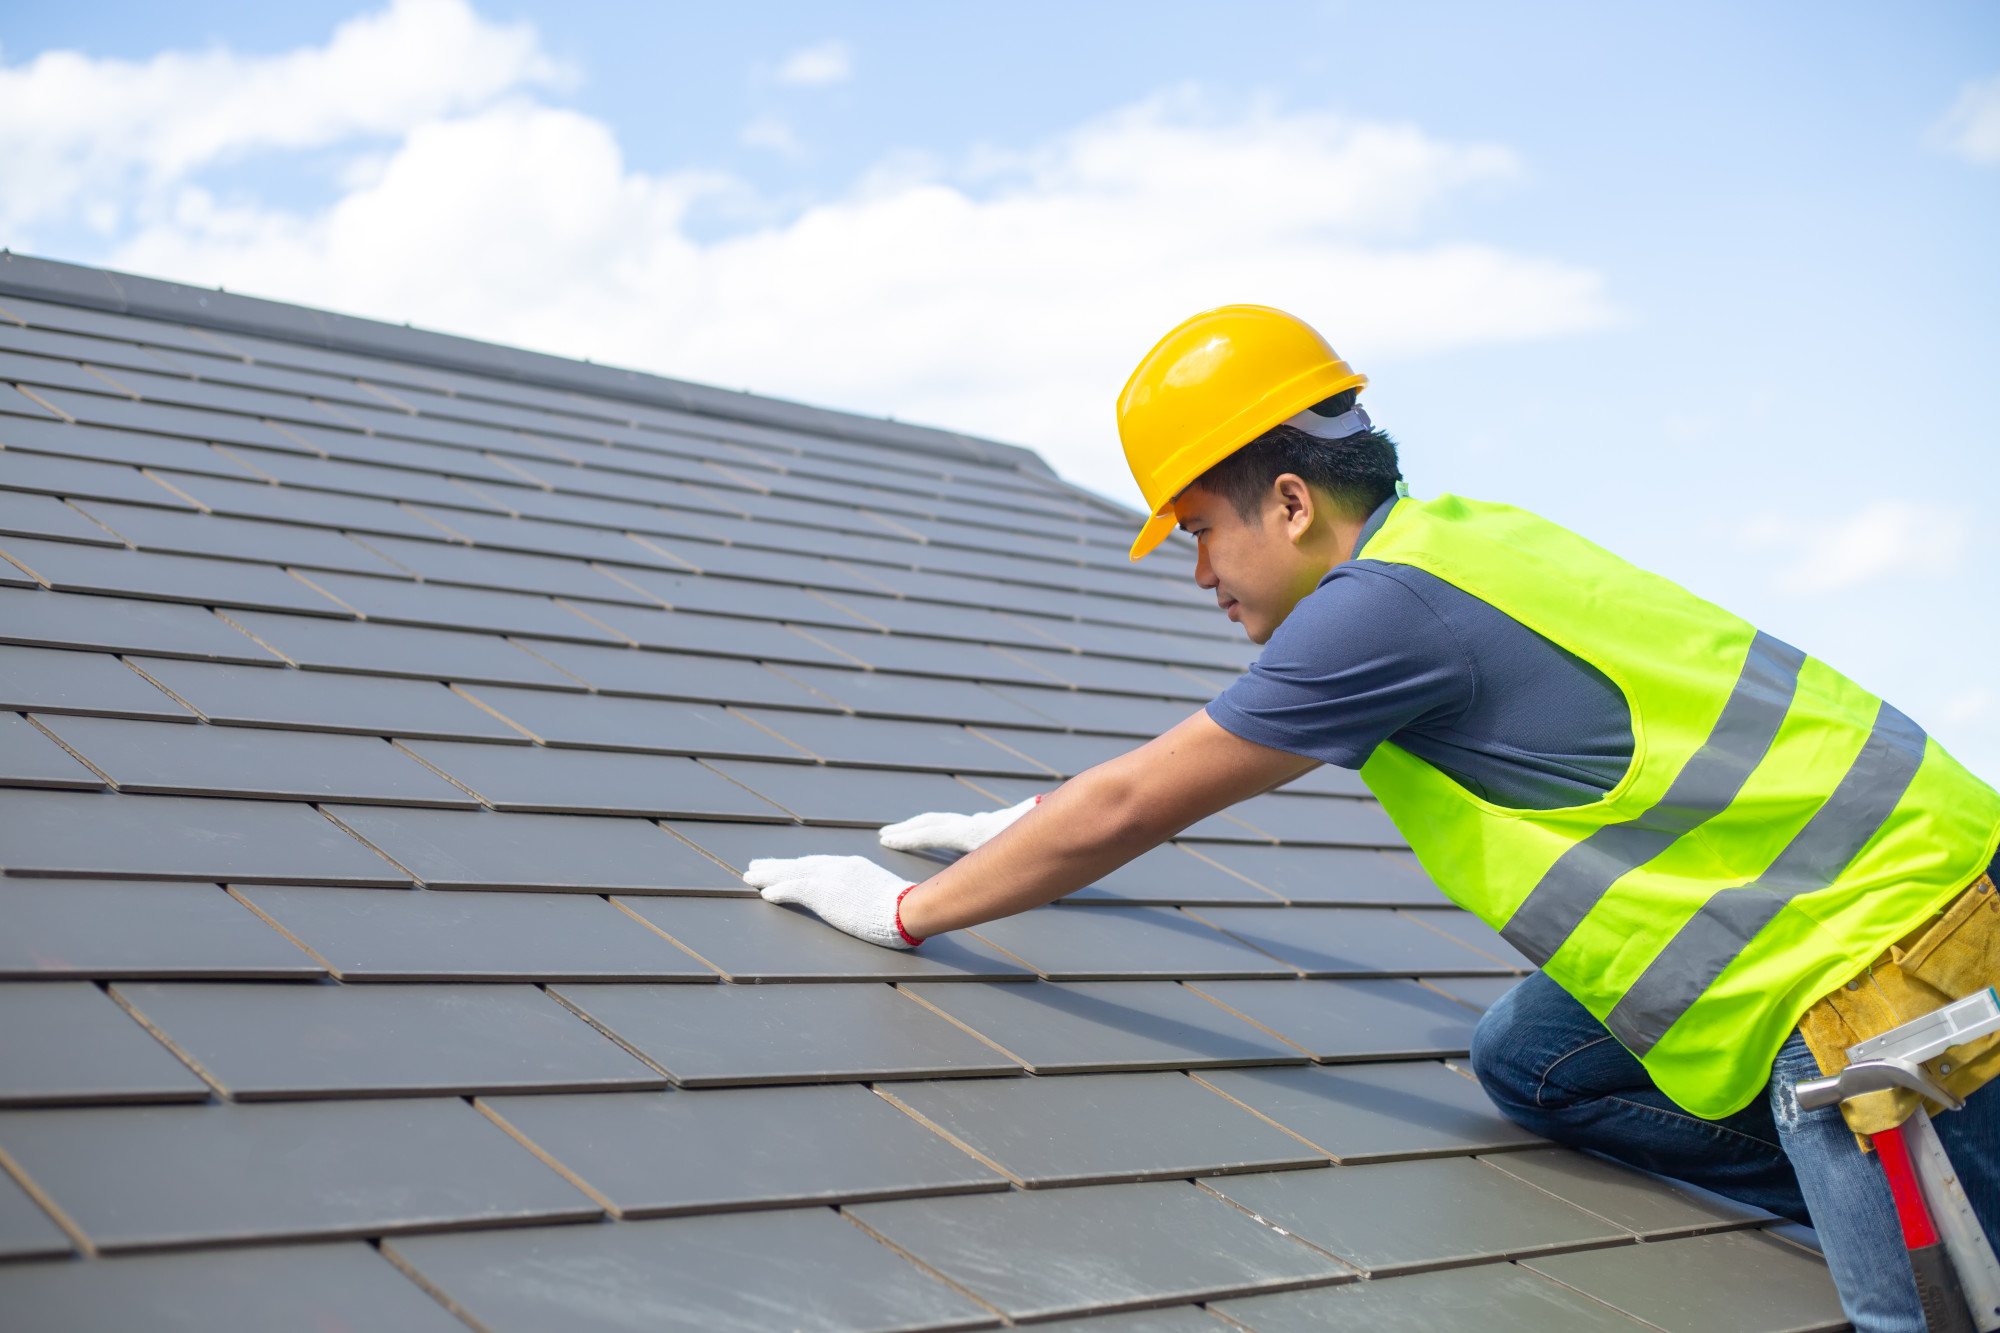 Did you know that not all roofers are created equal these days? Here's how simple it actually is to choose the best roofing company in your local area.